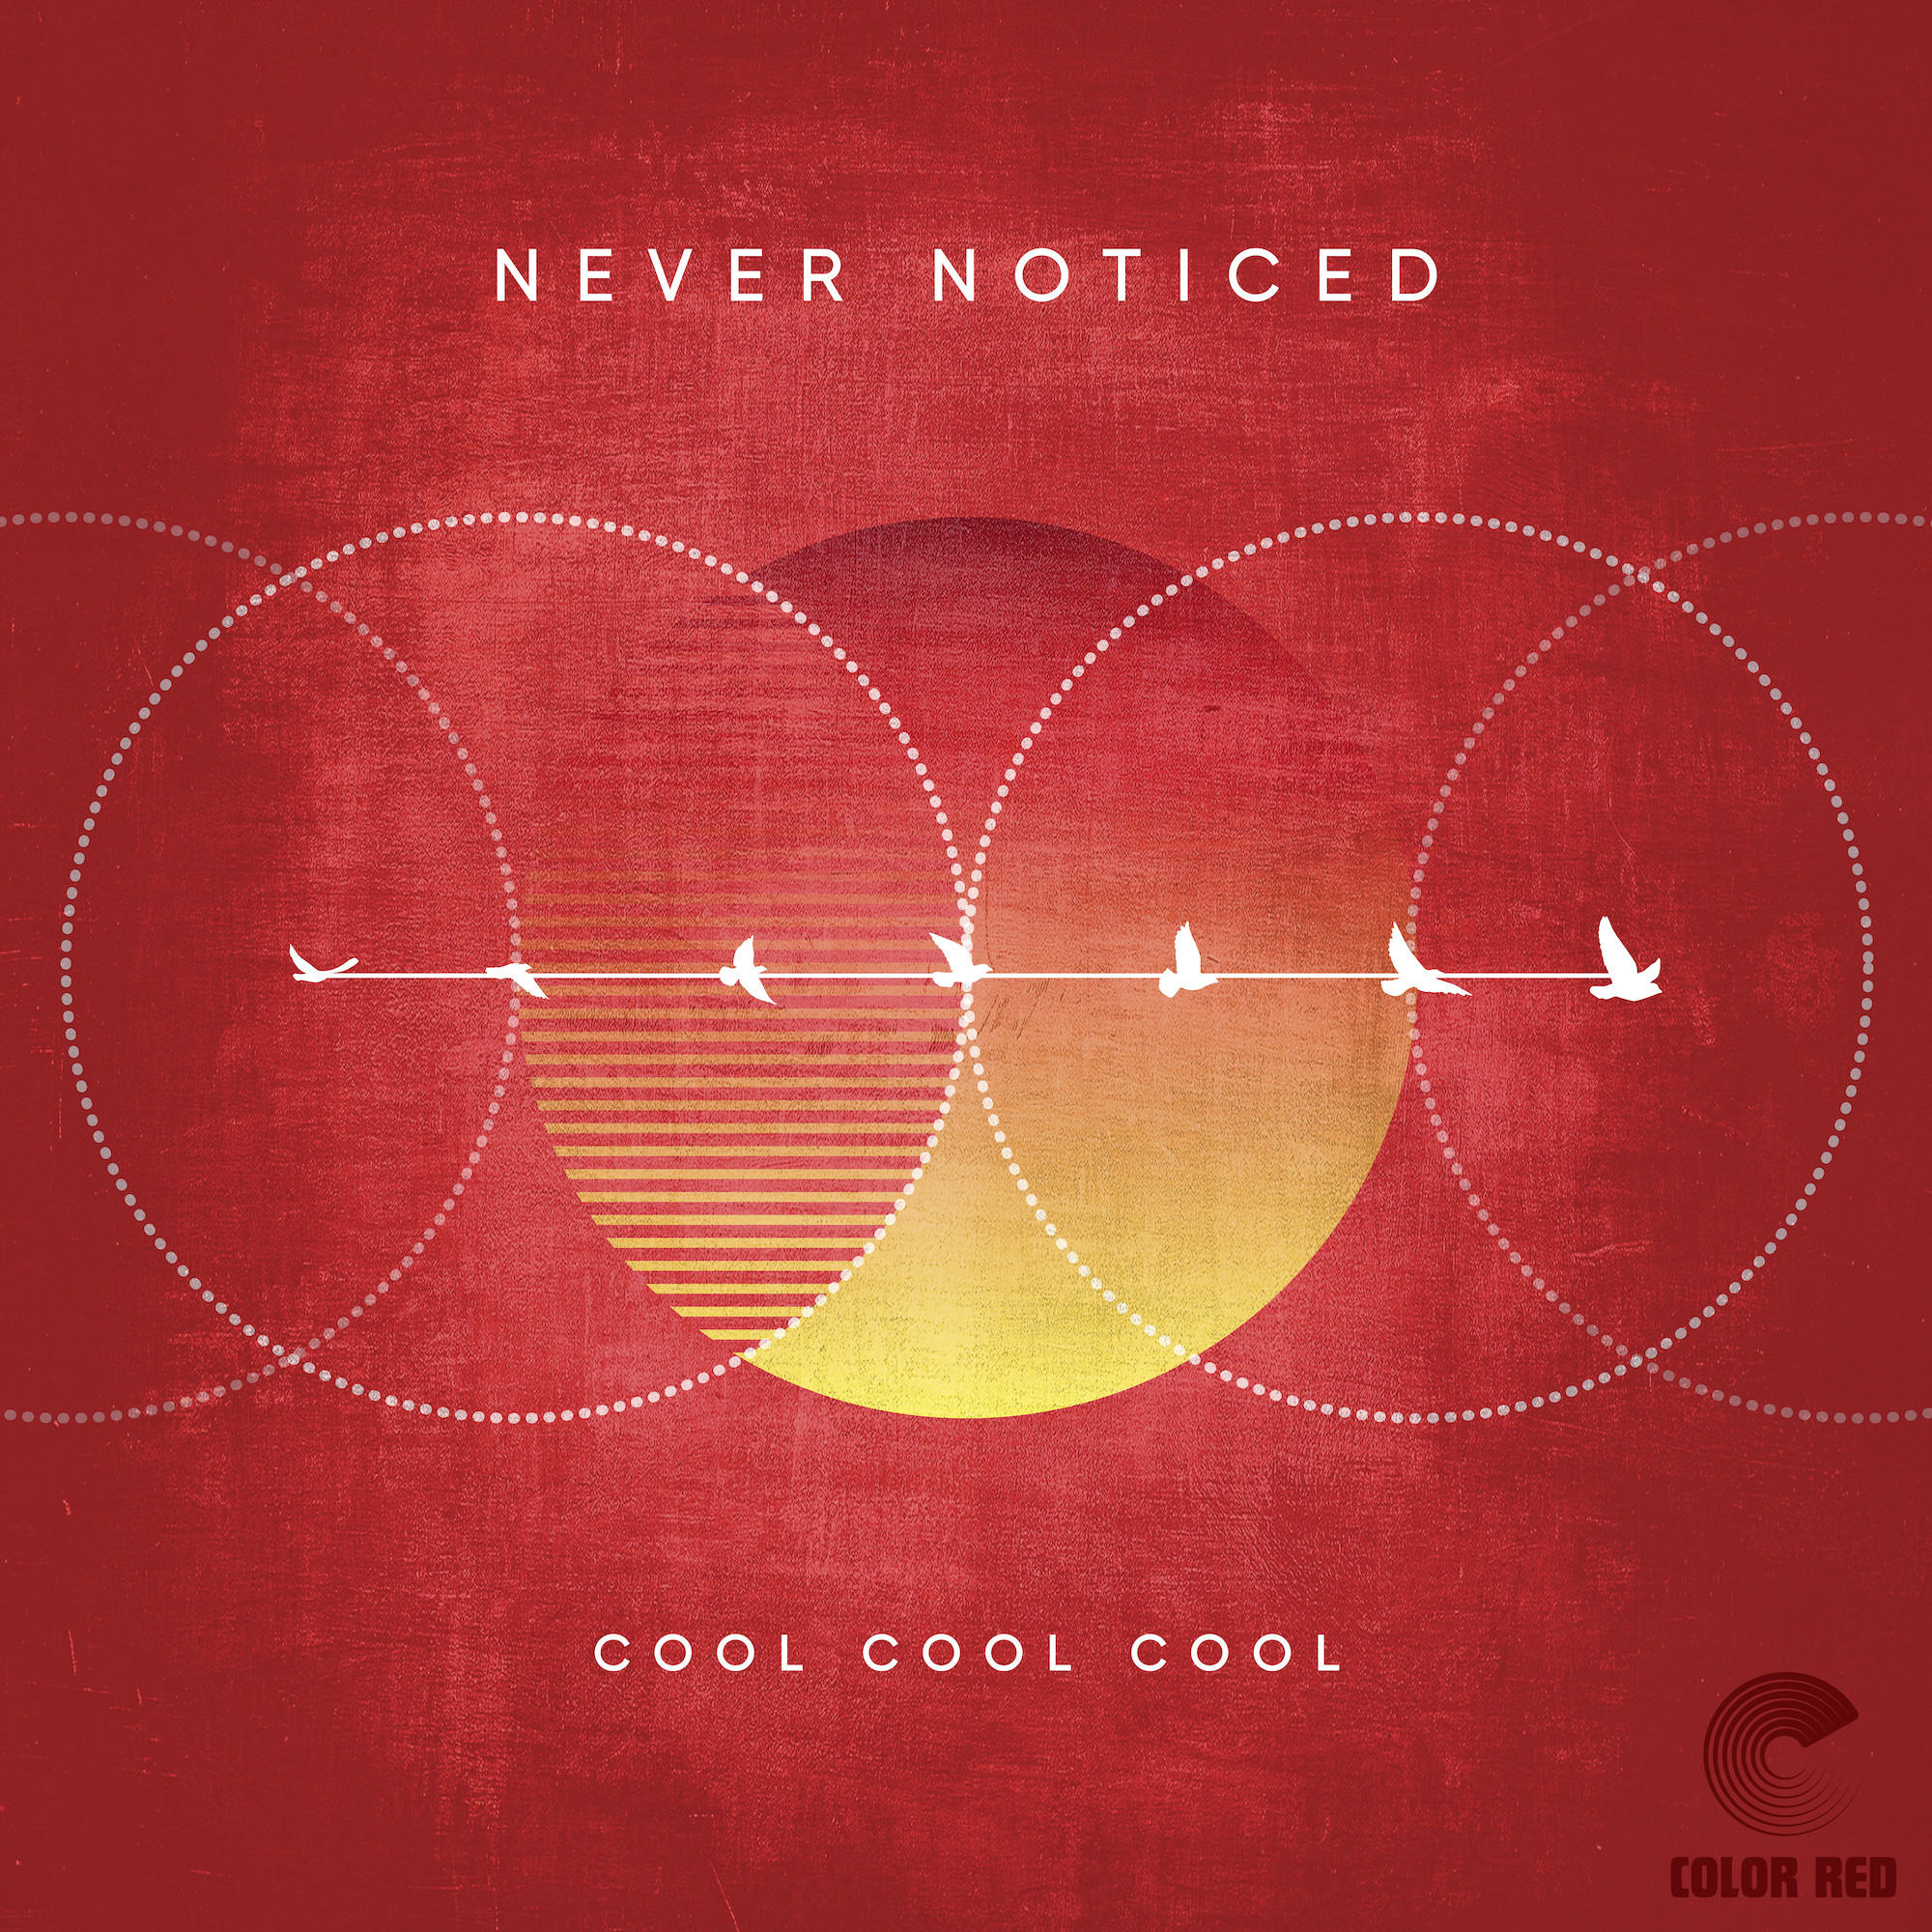 Groove Unleashed: Cool Cool Cool Drops Debut Single 'Never Noticed'